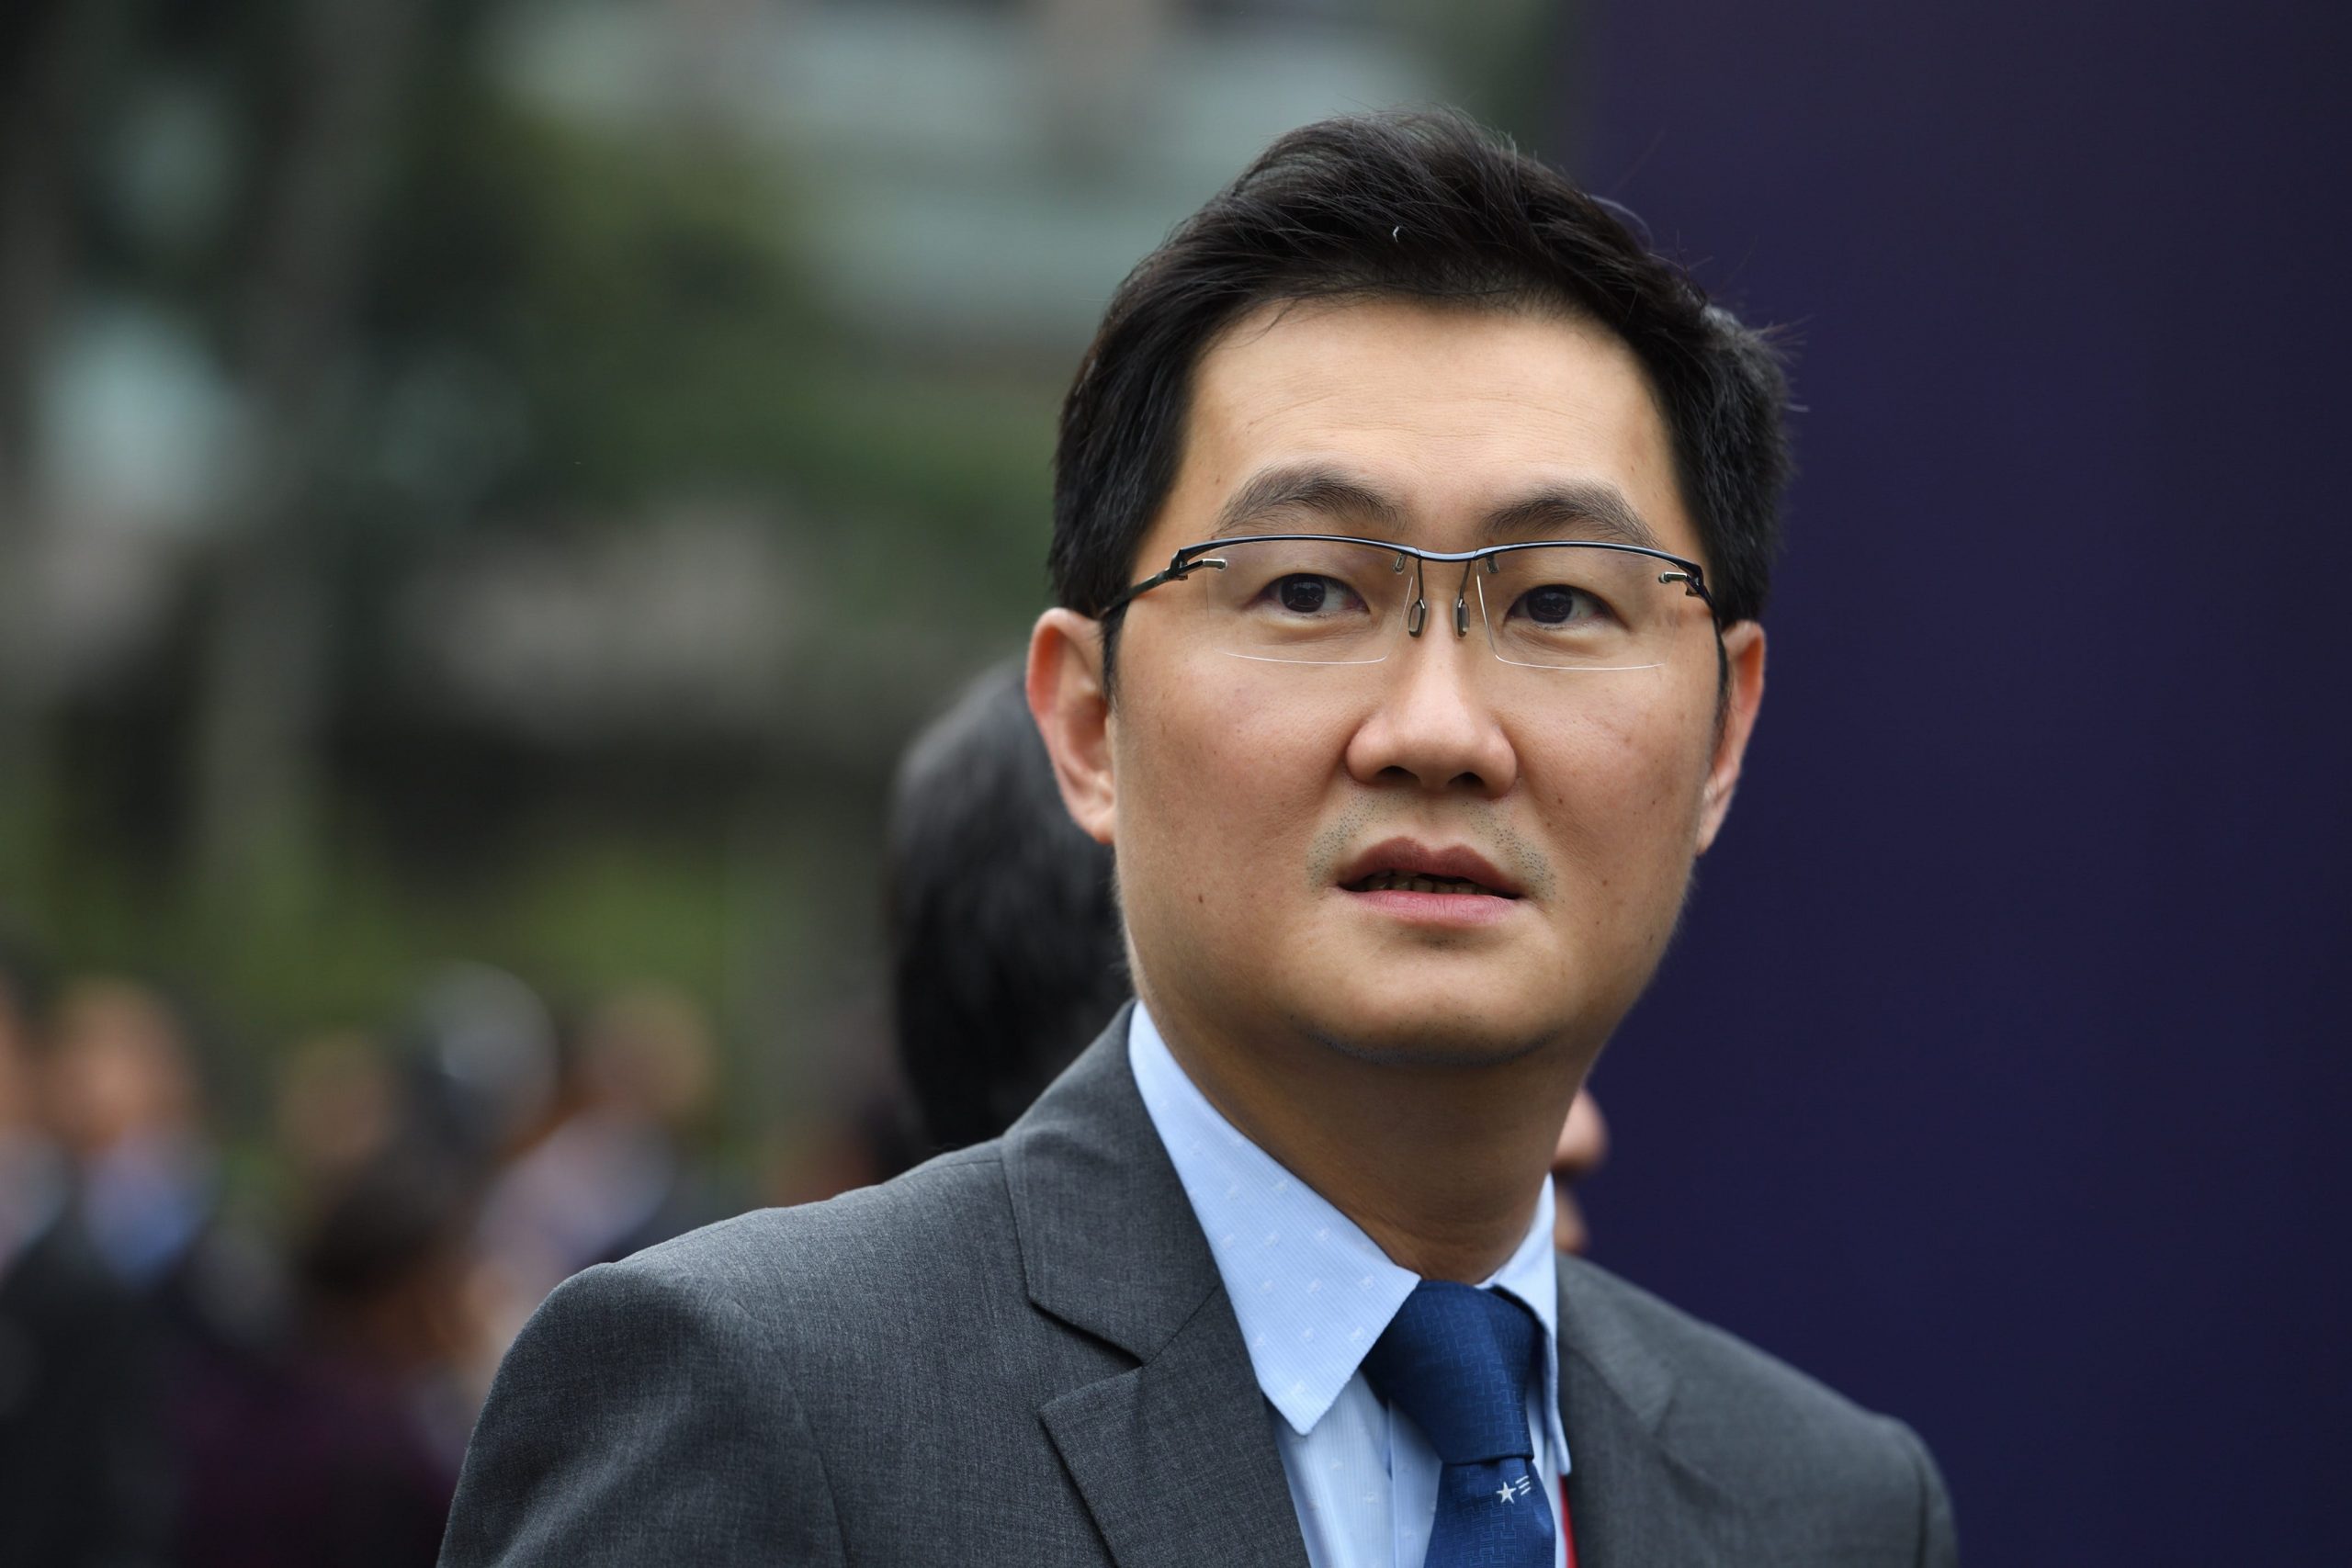 Ma Huateng, also known as Pony Ma, the CEO of Tencent looks into the distance while wearing a grey suit and blue tie.